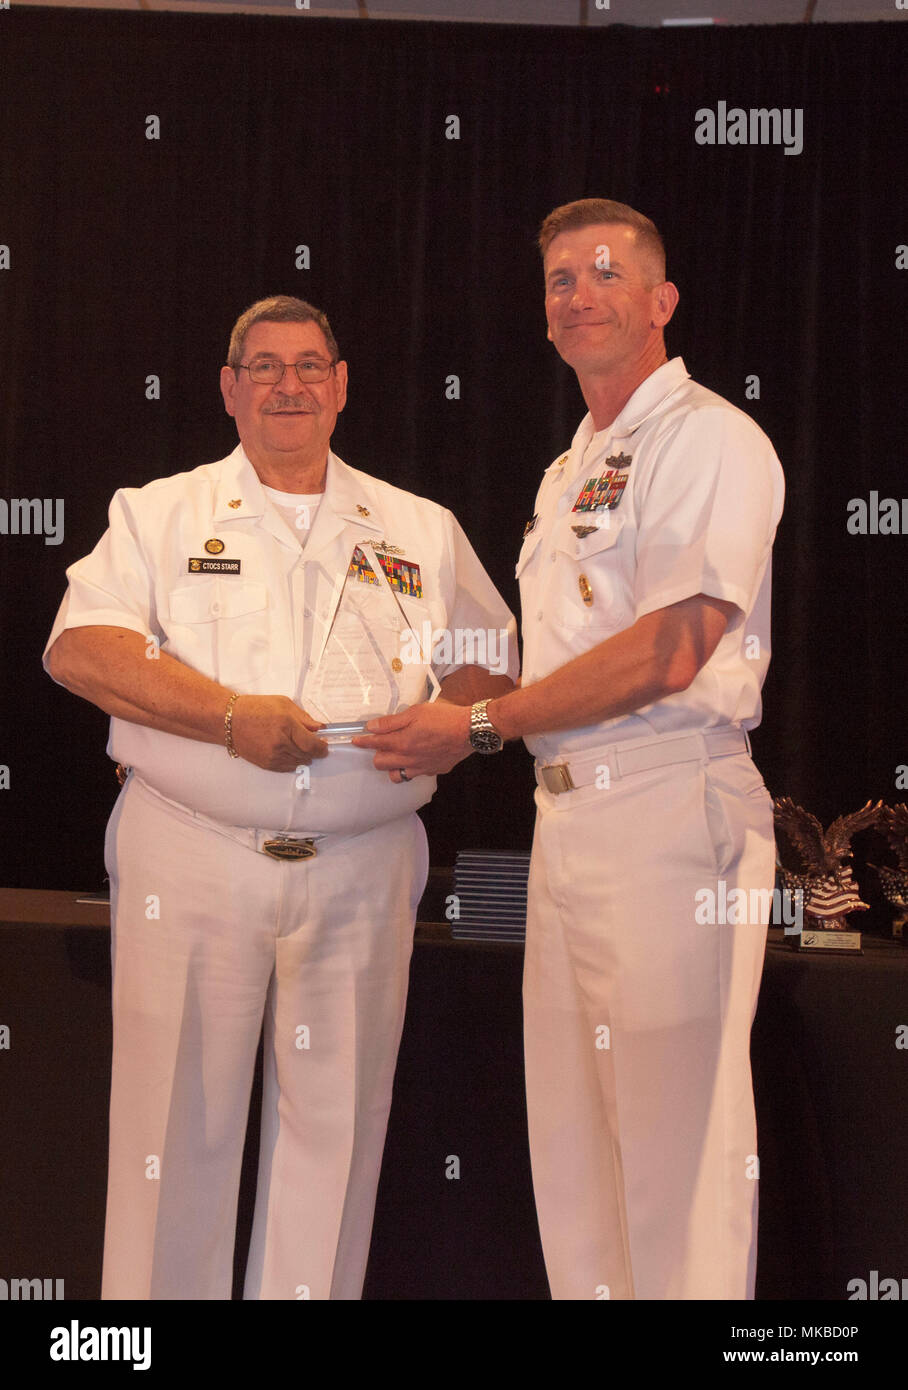 Alan Starr, Third Vice President of the Fort Lauderdale Navy League (left), presents an award to Master Chief Petty Officer (MCPO) Jason Knupp, MCPO of Expeditionary Strike Group Two (right), during the Enlisted Person of the Year Event in Fort Lauderdale, May 3, 2018. The Enlisted Person of the Year Event highlights Marines and Sailors that have gone above and beyond in their performances amongst their peers. (U.S. Marine Corps photo by Staff Sgt. Leon M. Branchaud) Stock Photo